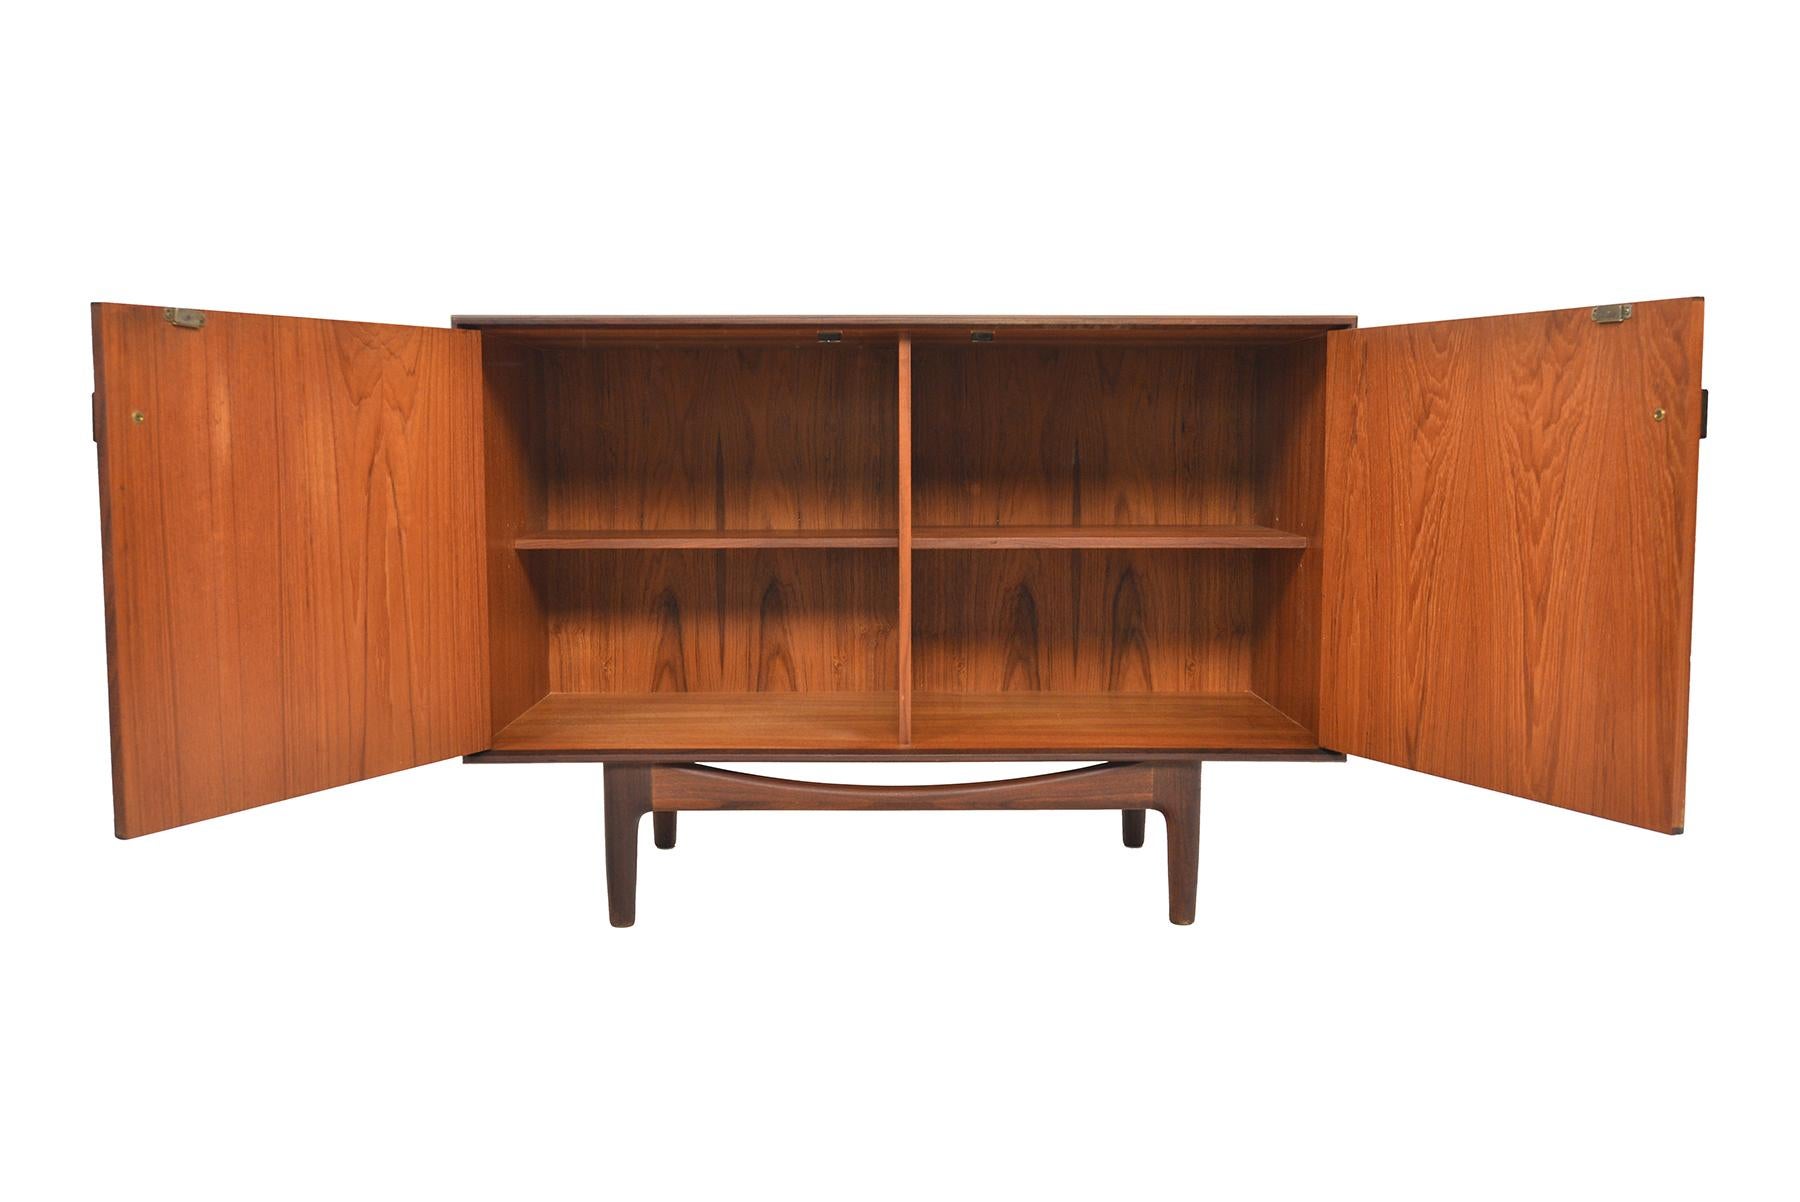 This small mid century teak credenza was designed by Ib Kofod Larsen for G Plan in 1961 for the Danish Range. Crafted in teak and afrormosia with handsomely refined lines, two wide doors open to reveal two bays with adjustable shelving. Finished on